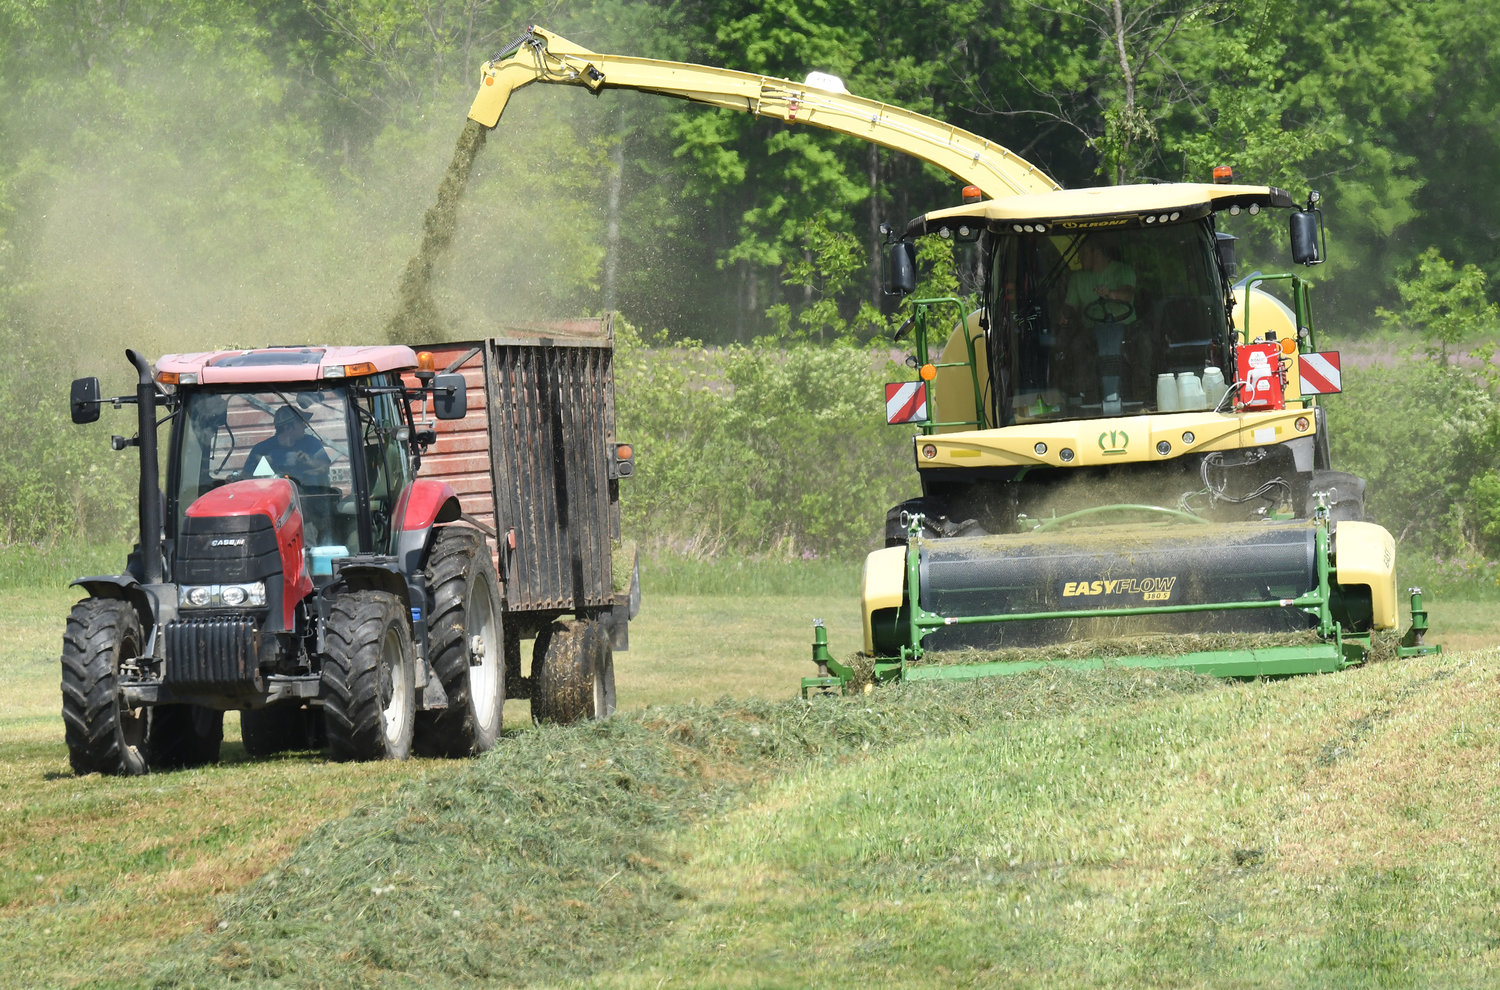 Farmers from Brabant Farms in Verona, a past host of the annual Farm Fest, get the season’s  first cutting of grass/alfalfa as they work in a field off Route 49 in New London. Area residents will have a chance to learn all about farm life as the popular event will be held on Friday at DiNitto Farms, 6586 Benton Road in Marcy.